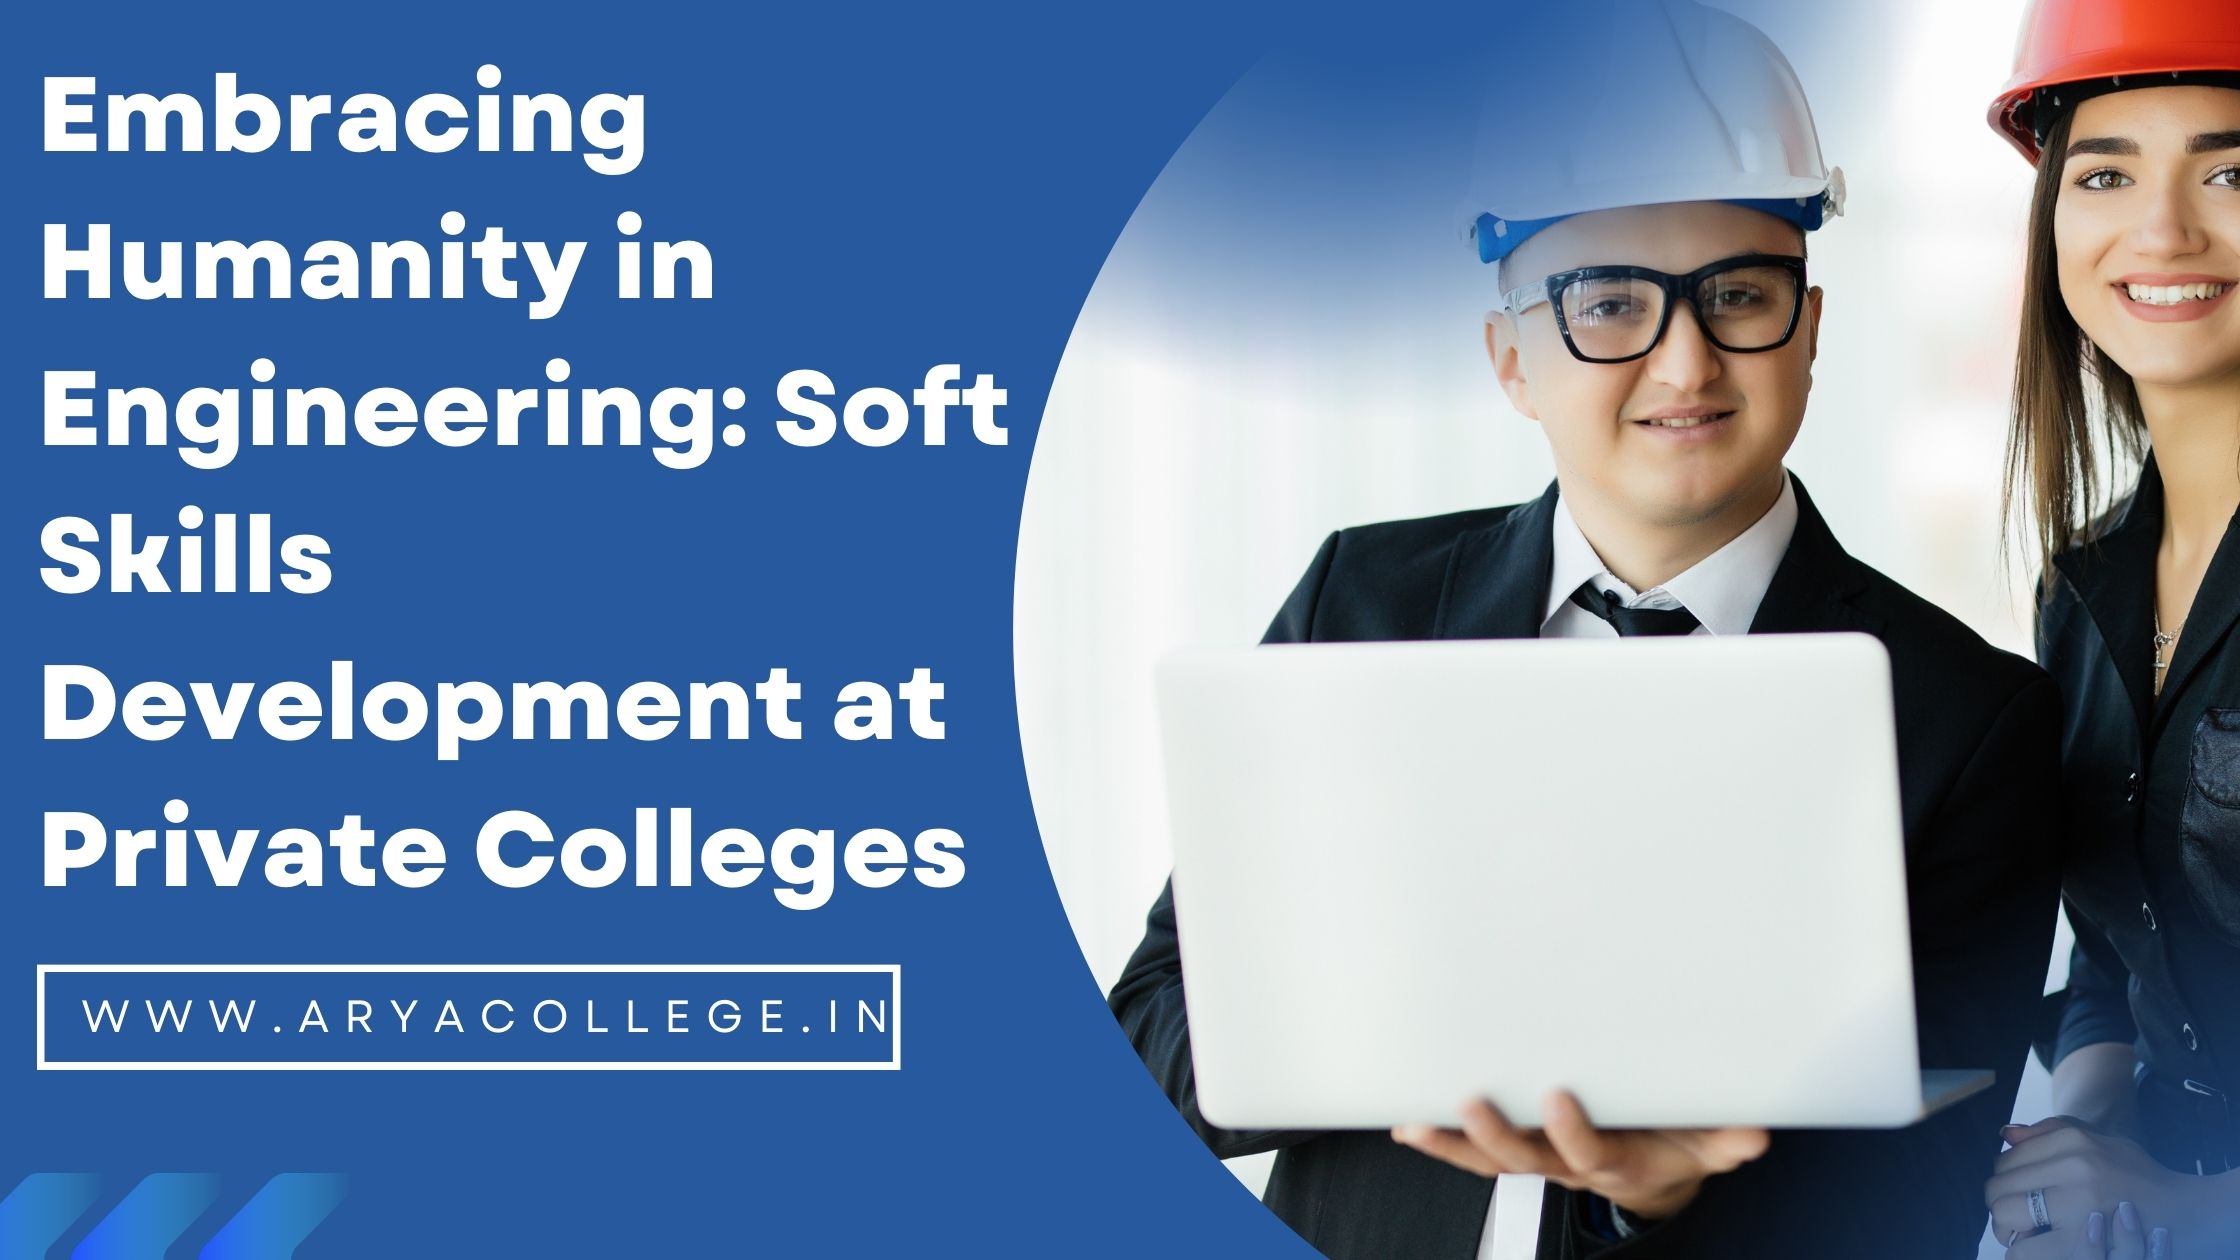 Embracing Humanity in Engineering: Soft Skills Development at Private Colleges